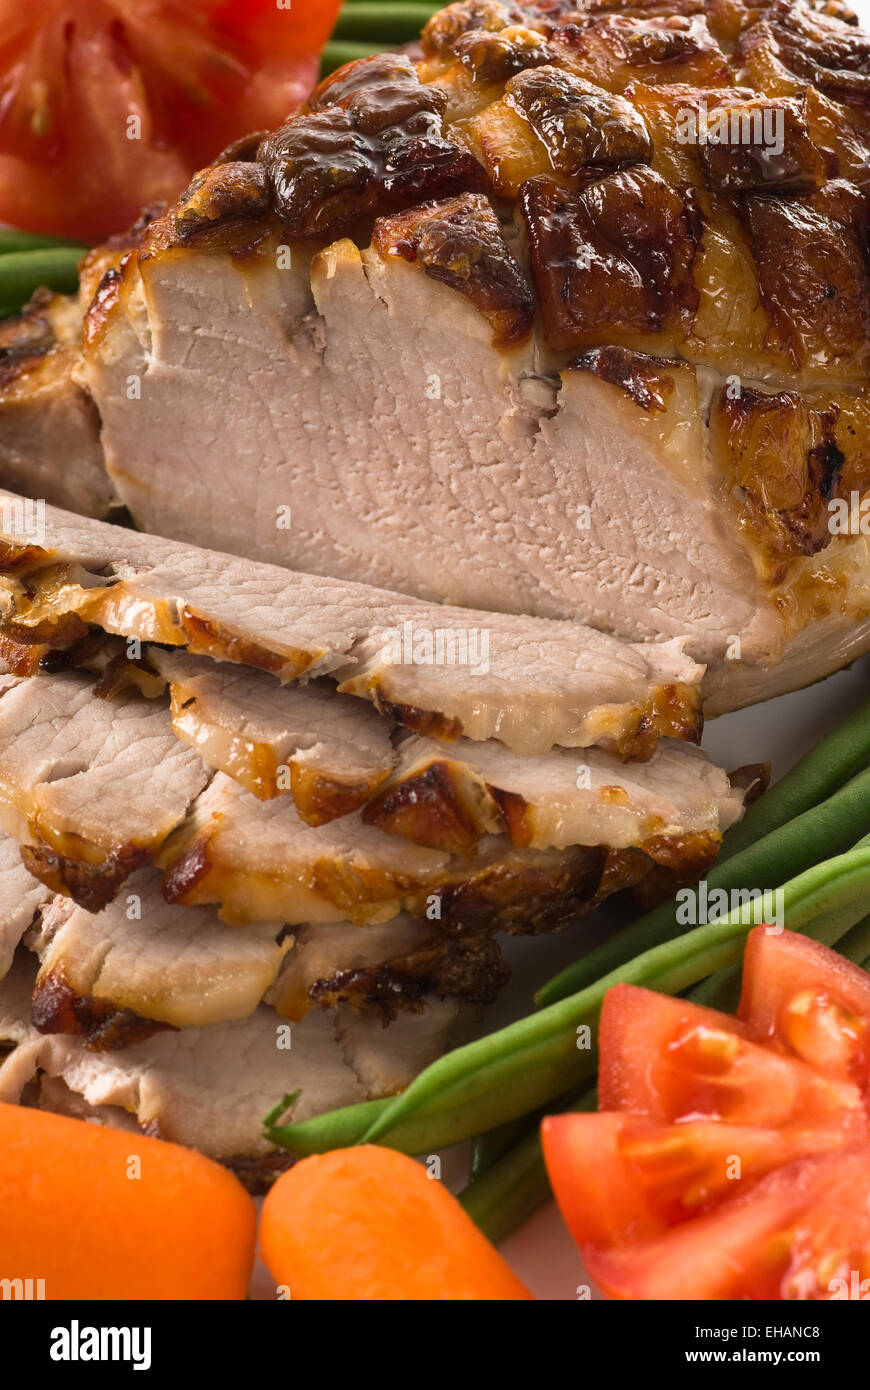 Roasted pork with green beans, tomato and carrot. Stock Photo